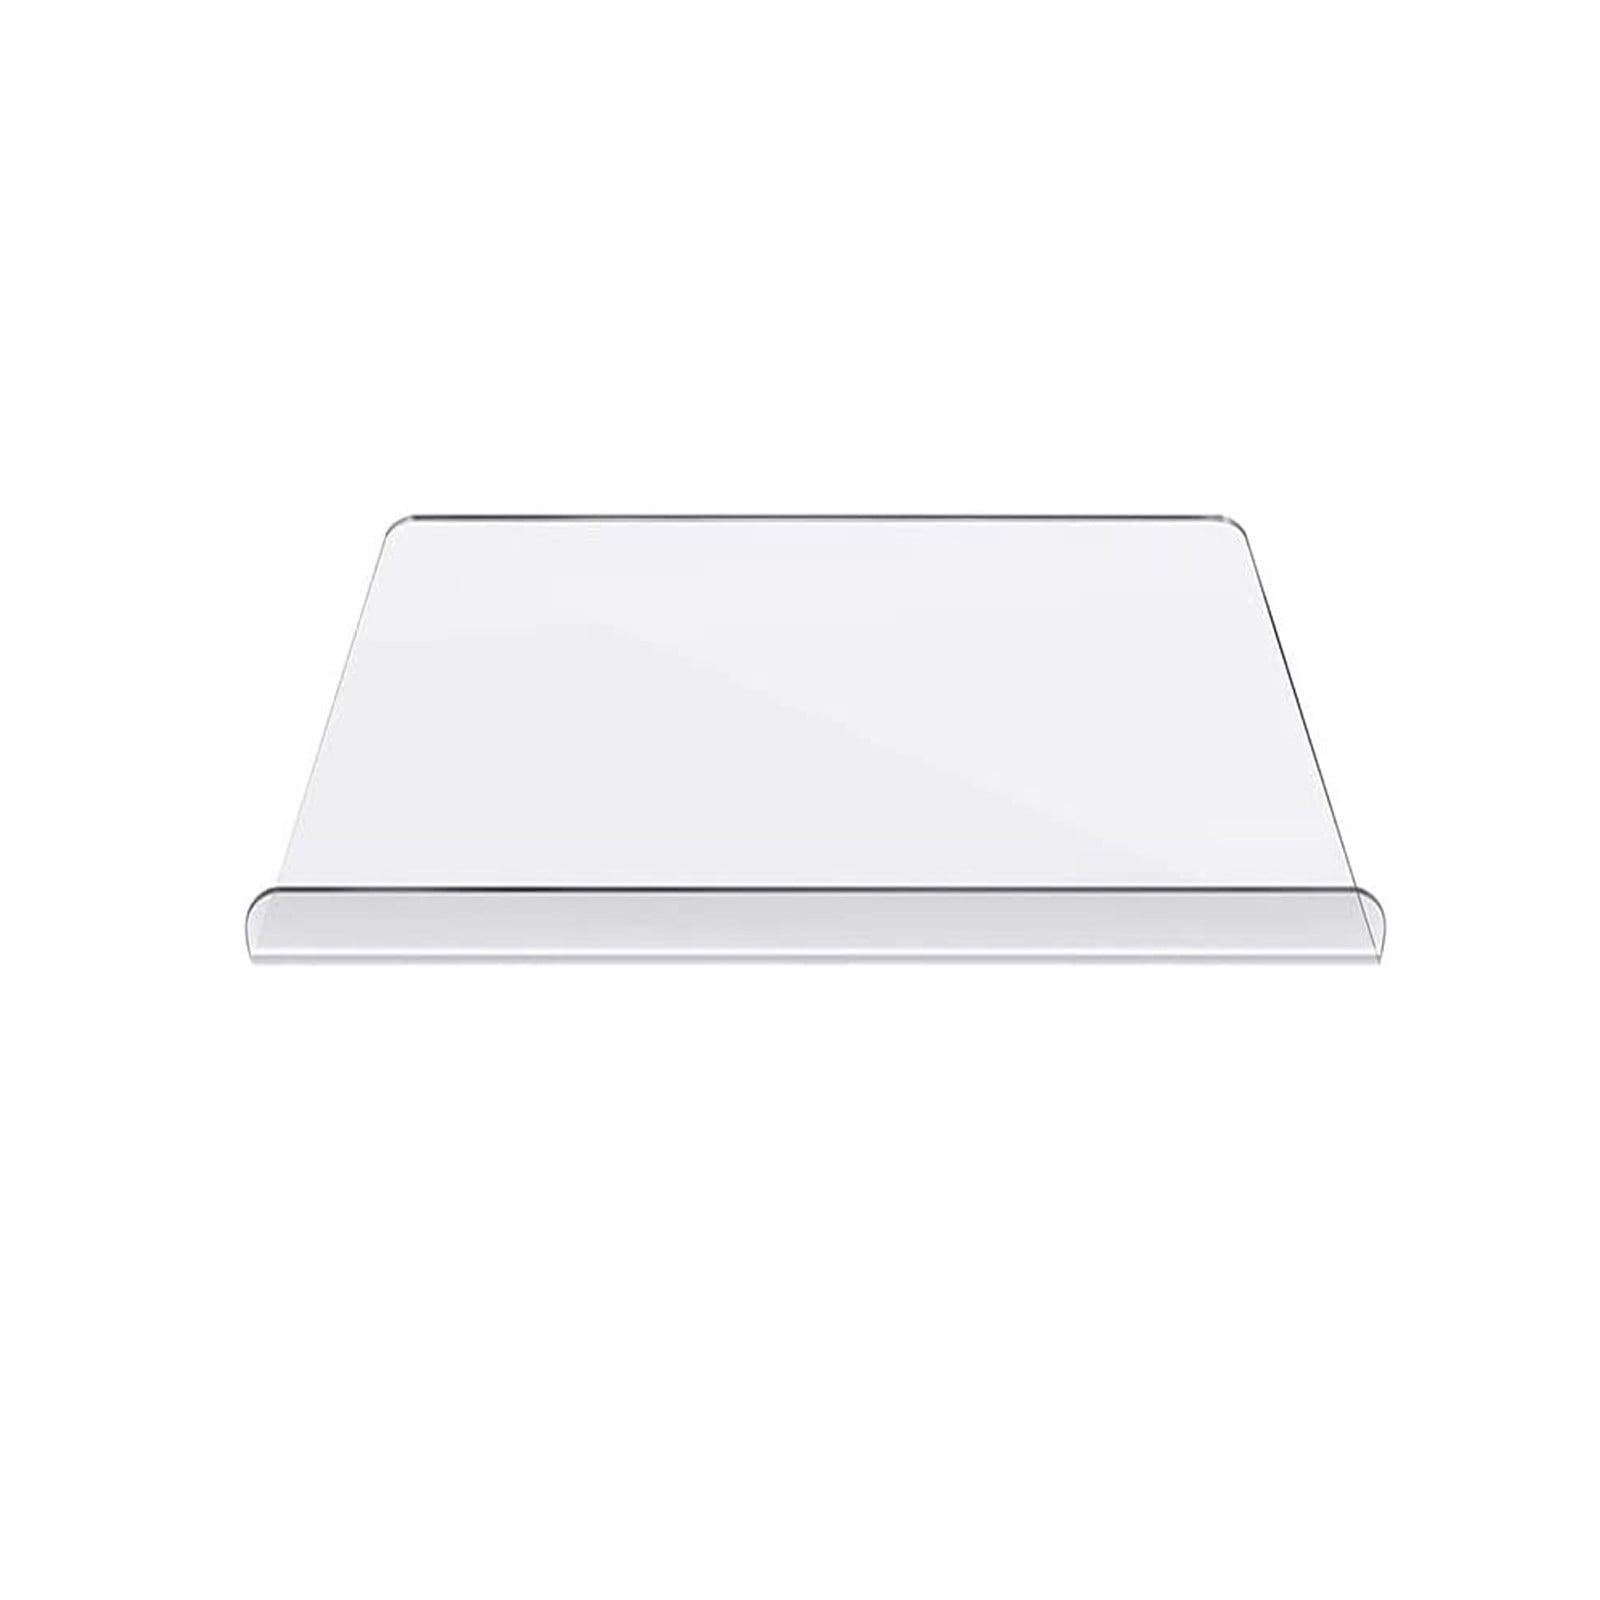 VALSEEL Kitchen Gadgets, Kitchen Countertop with Acrylic Cutting Board,  Countertop with Transparent Cutting Board with Edges, Countertop Protector